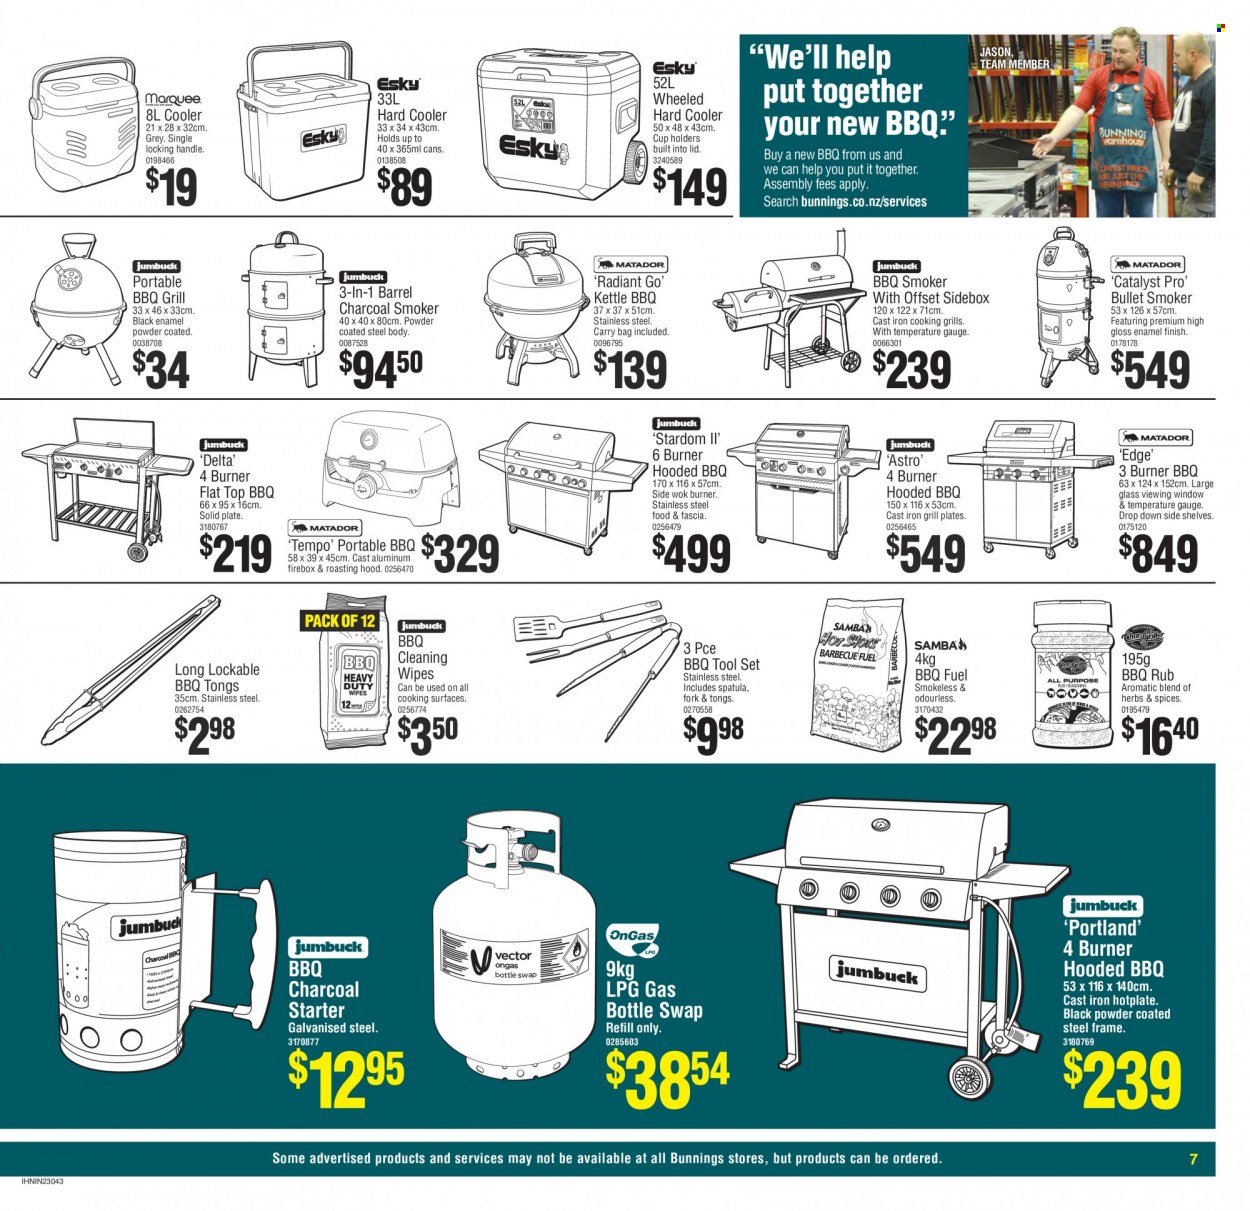 thumbnail - Bunnings Warehouse mailer - Sales products - cleansing wipes, wipes, fork, lid, spatula, plate, wok, cup, tong, tool set, gas bottle, grill, charcoal smoker, firebox, portable barbecue, smoker. Page 7.